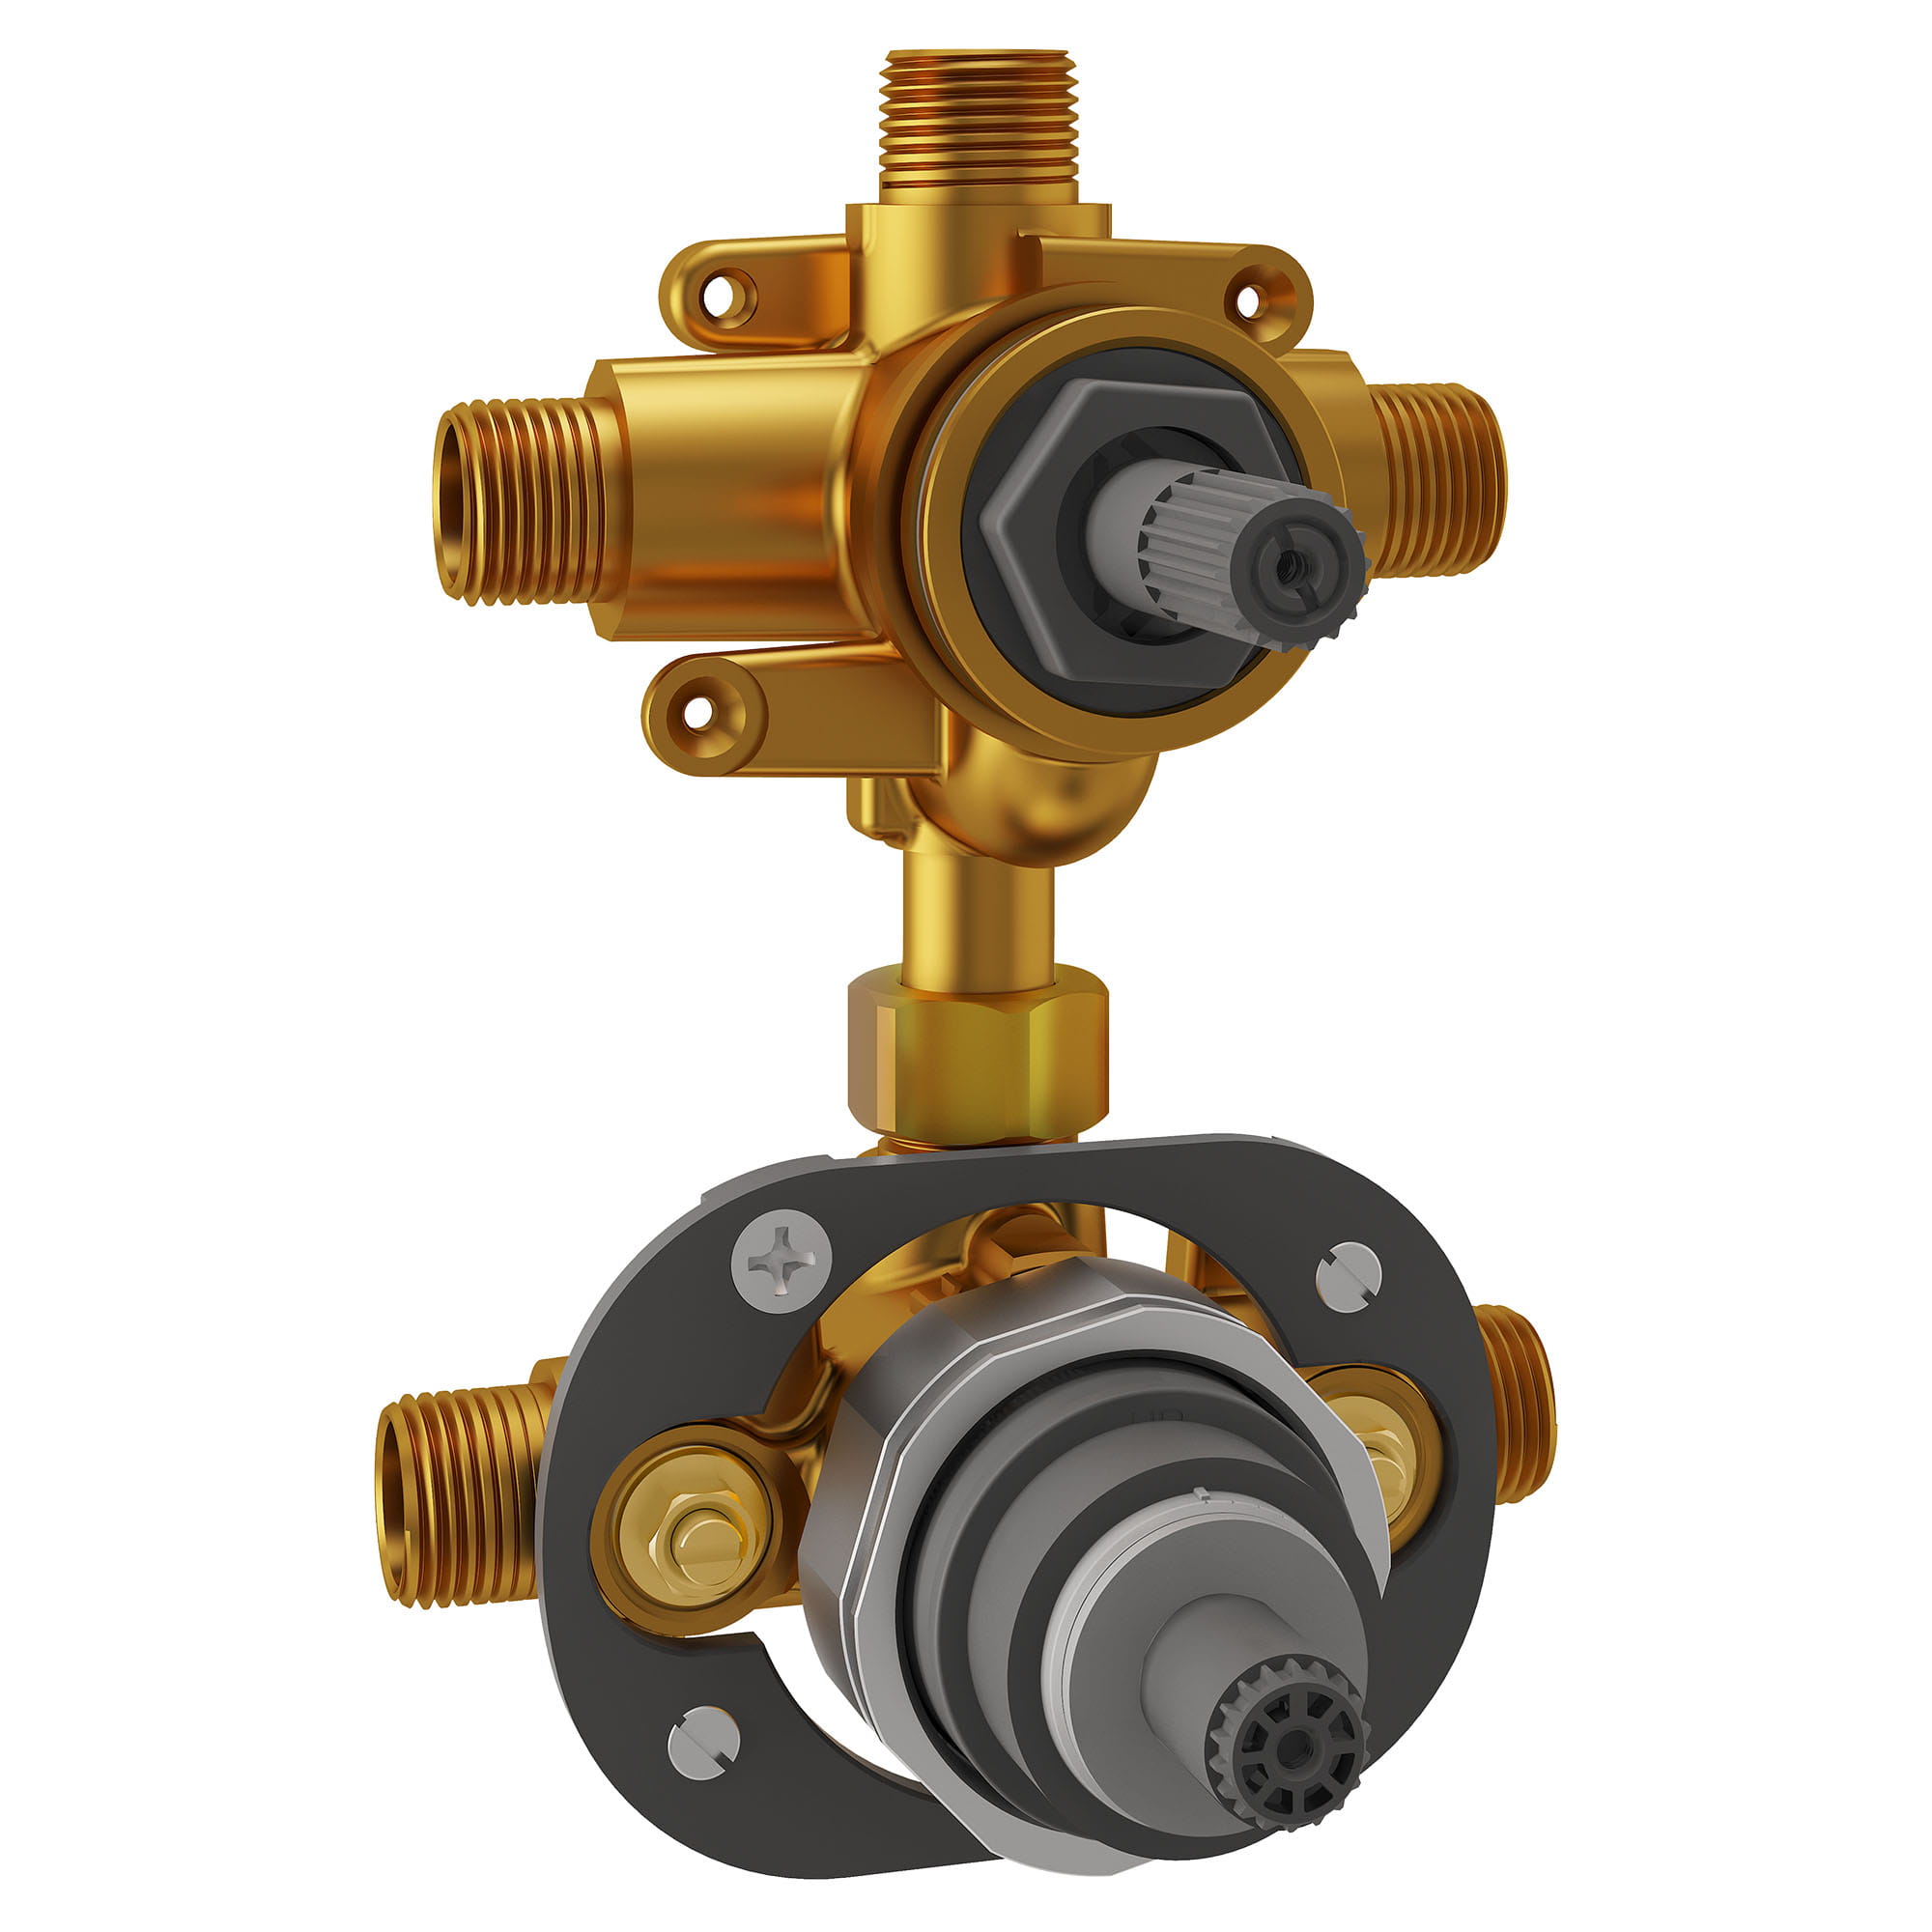 Pewter Standard Plumbing Supply Jaclo A379-TRIM-PEW Traditional Round Pressure Balance Valve with Diverter & Murphy Lever Handle